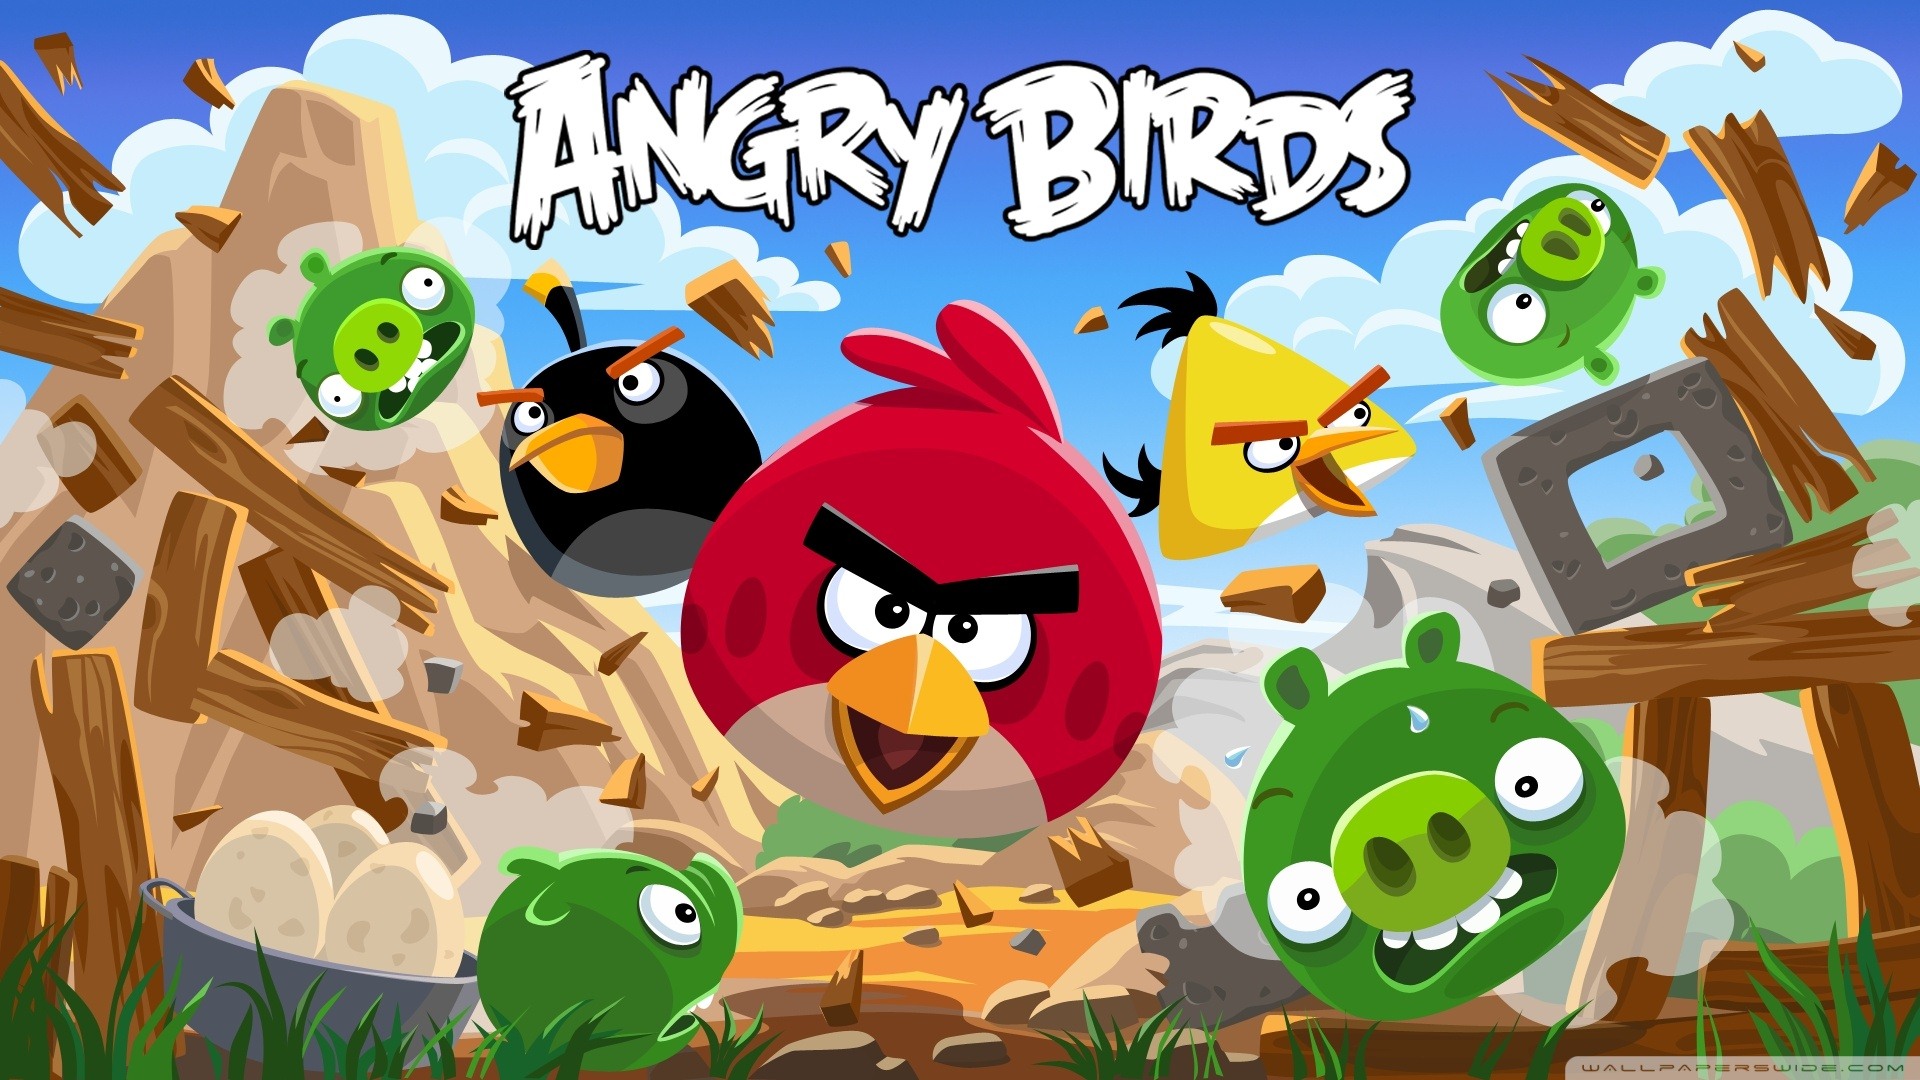 Angry Birds Game Wallpapers #10 - 1920x1080